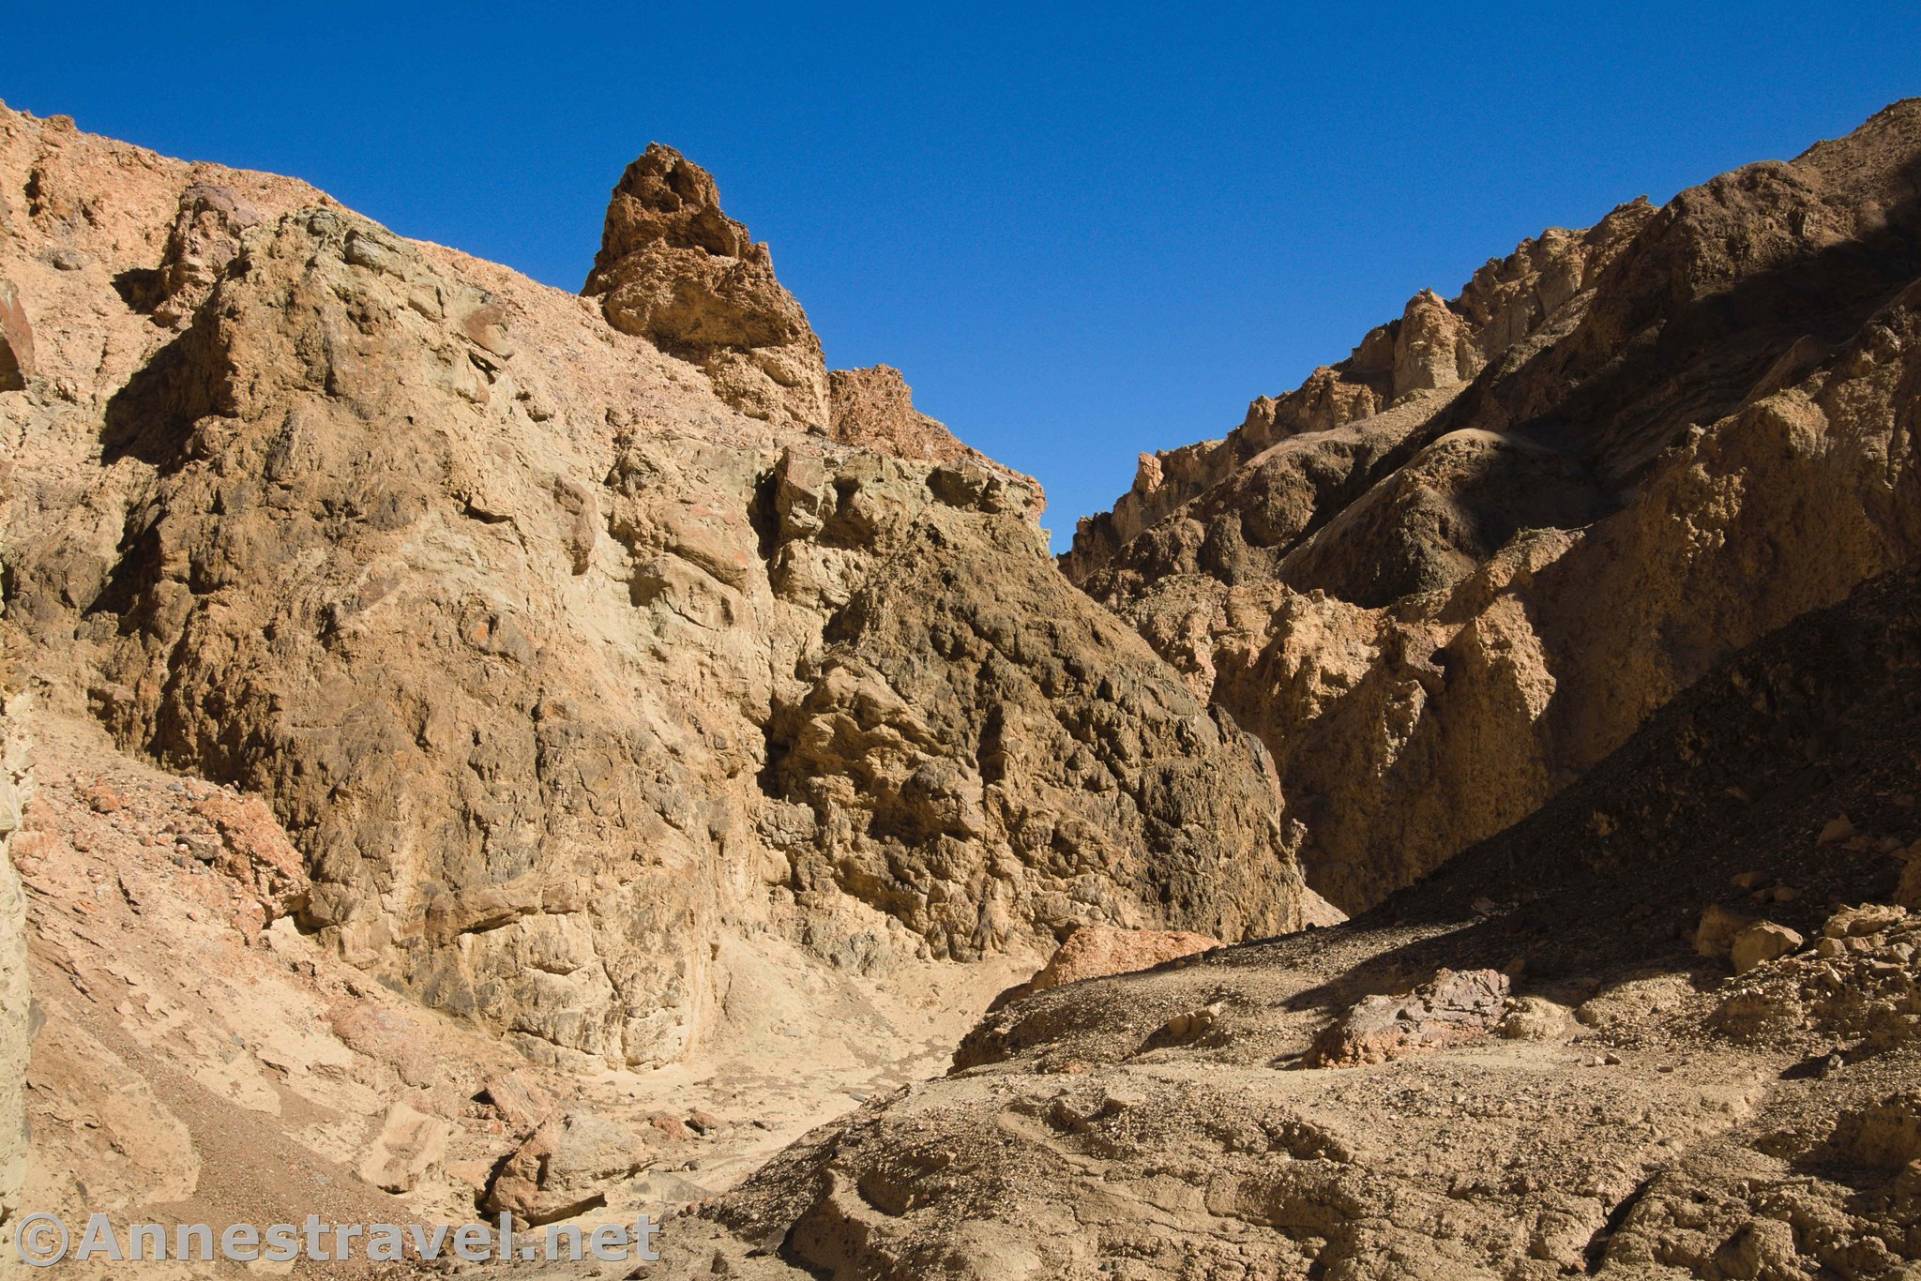 Rock formations in 20 Mule Team Canyon, Death Valley National Park, California